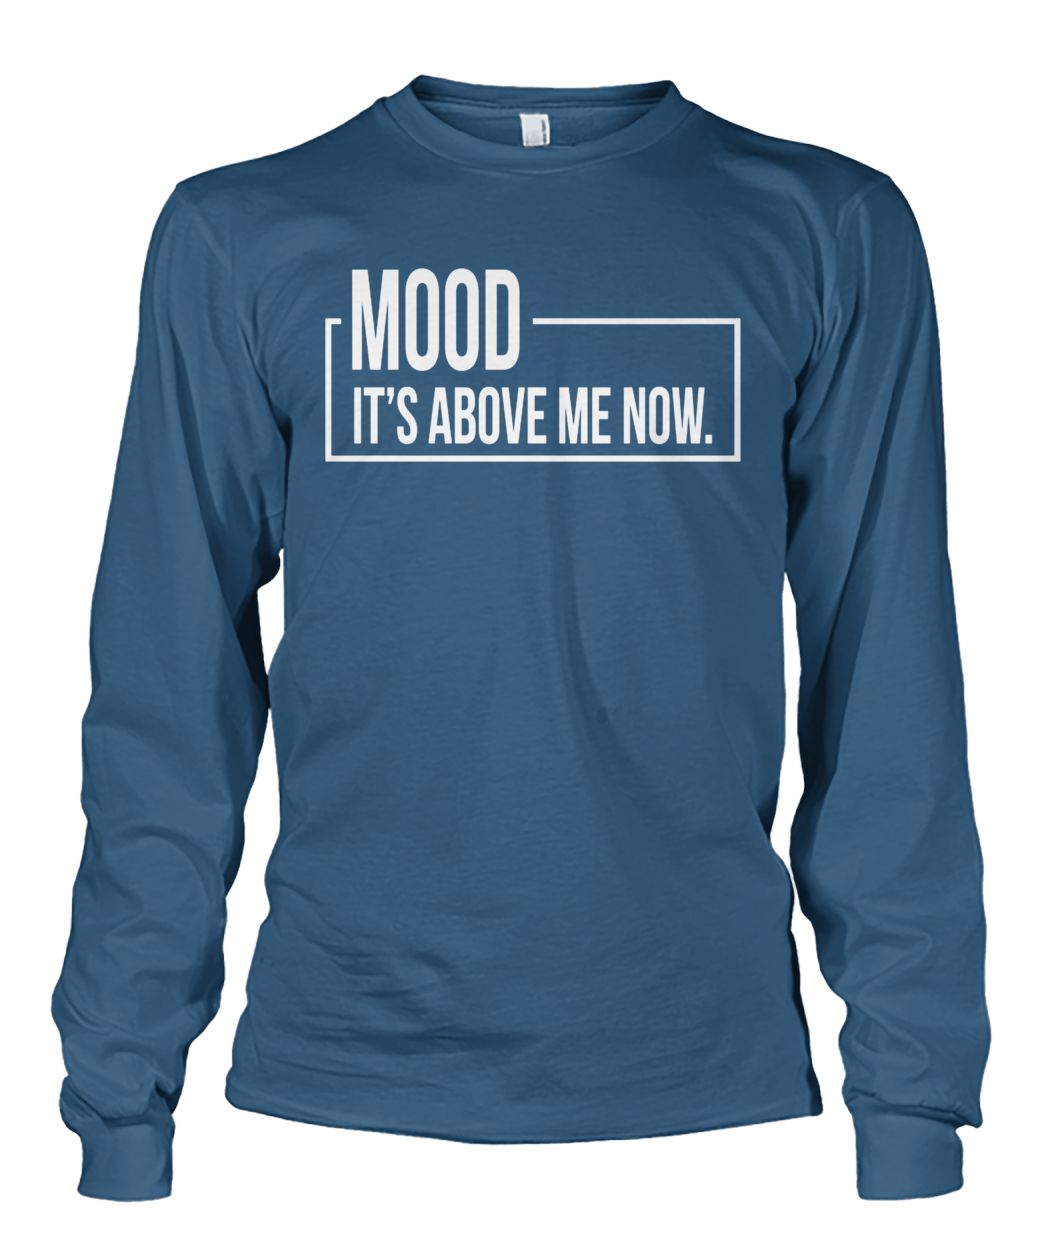 Mood it's above me now unisex long sleeve